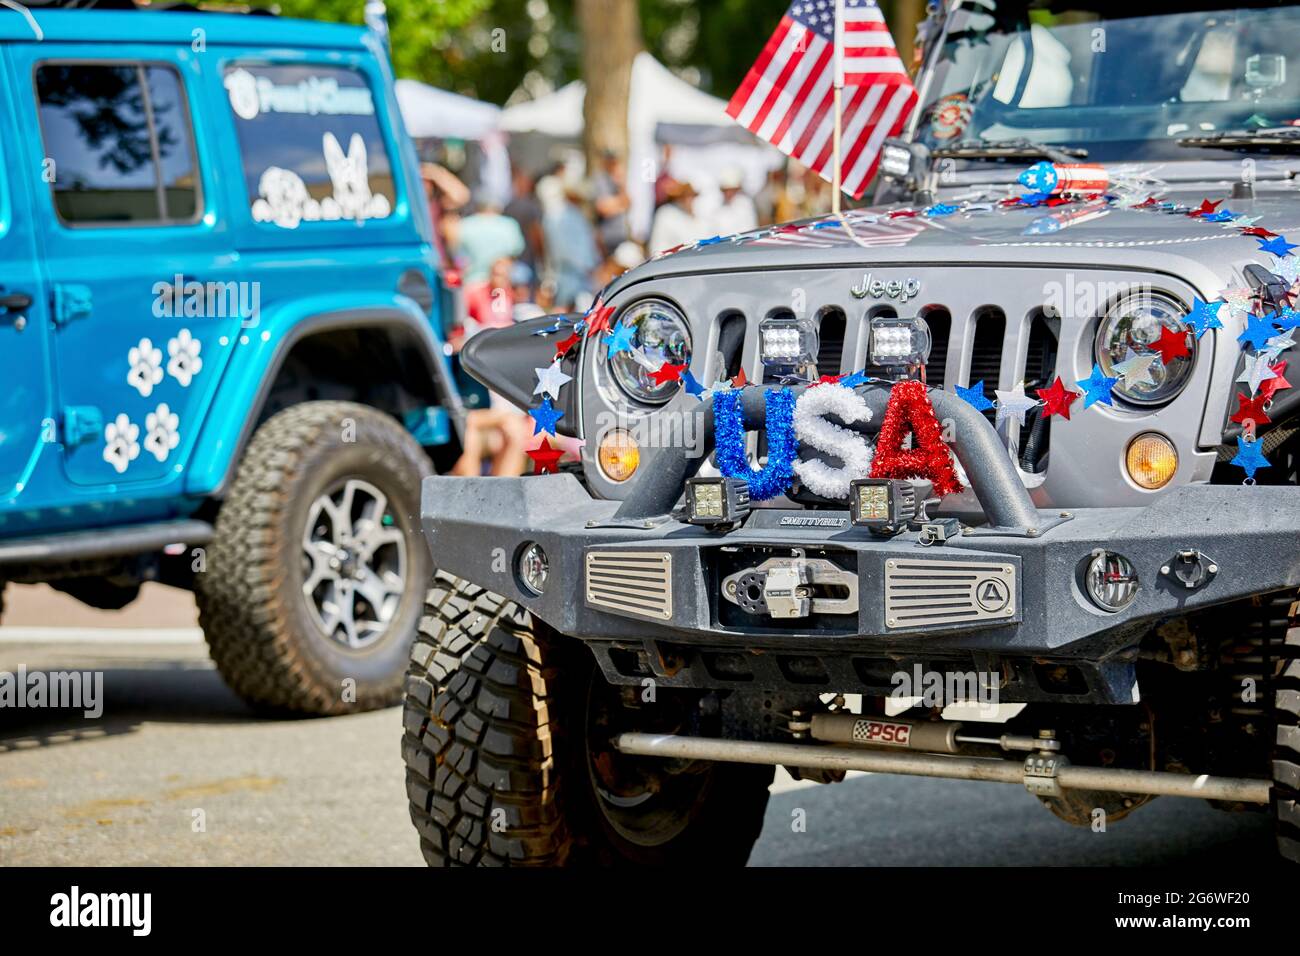 Prescott, Arizona, USA - July 3, 2021: Decorations on the front of a silver jeep in the 4th of July parade Stock Photo